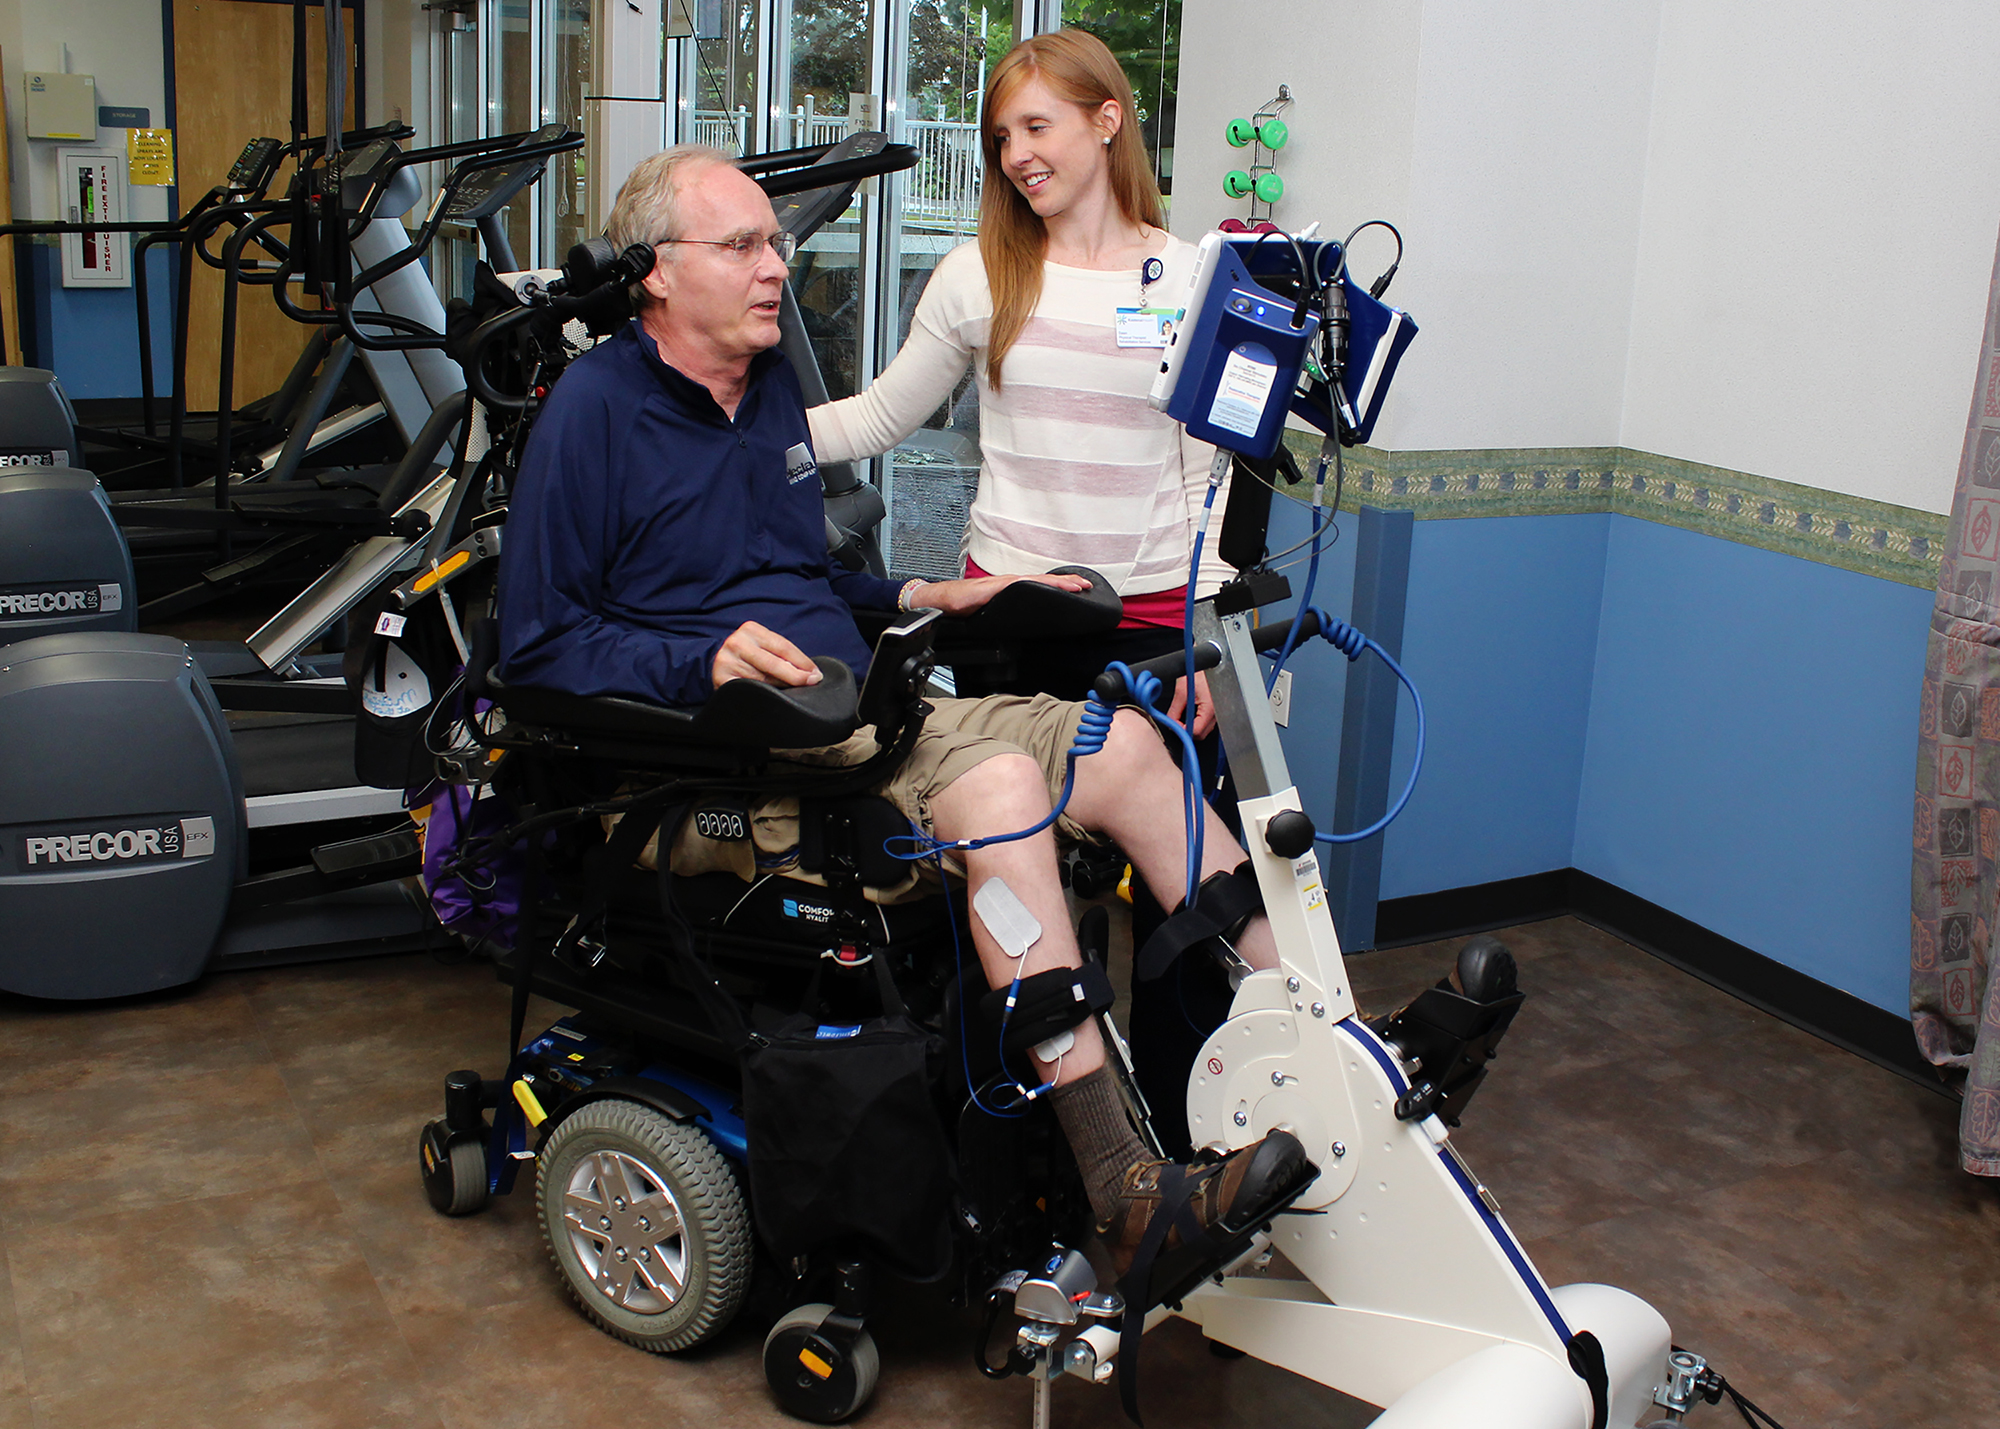 Pedaling Power |Rehabilitation Services Receives New Bike for Patients